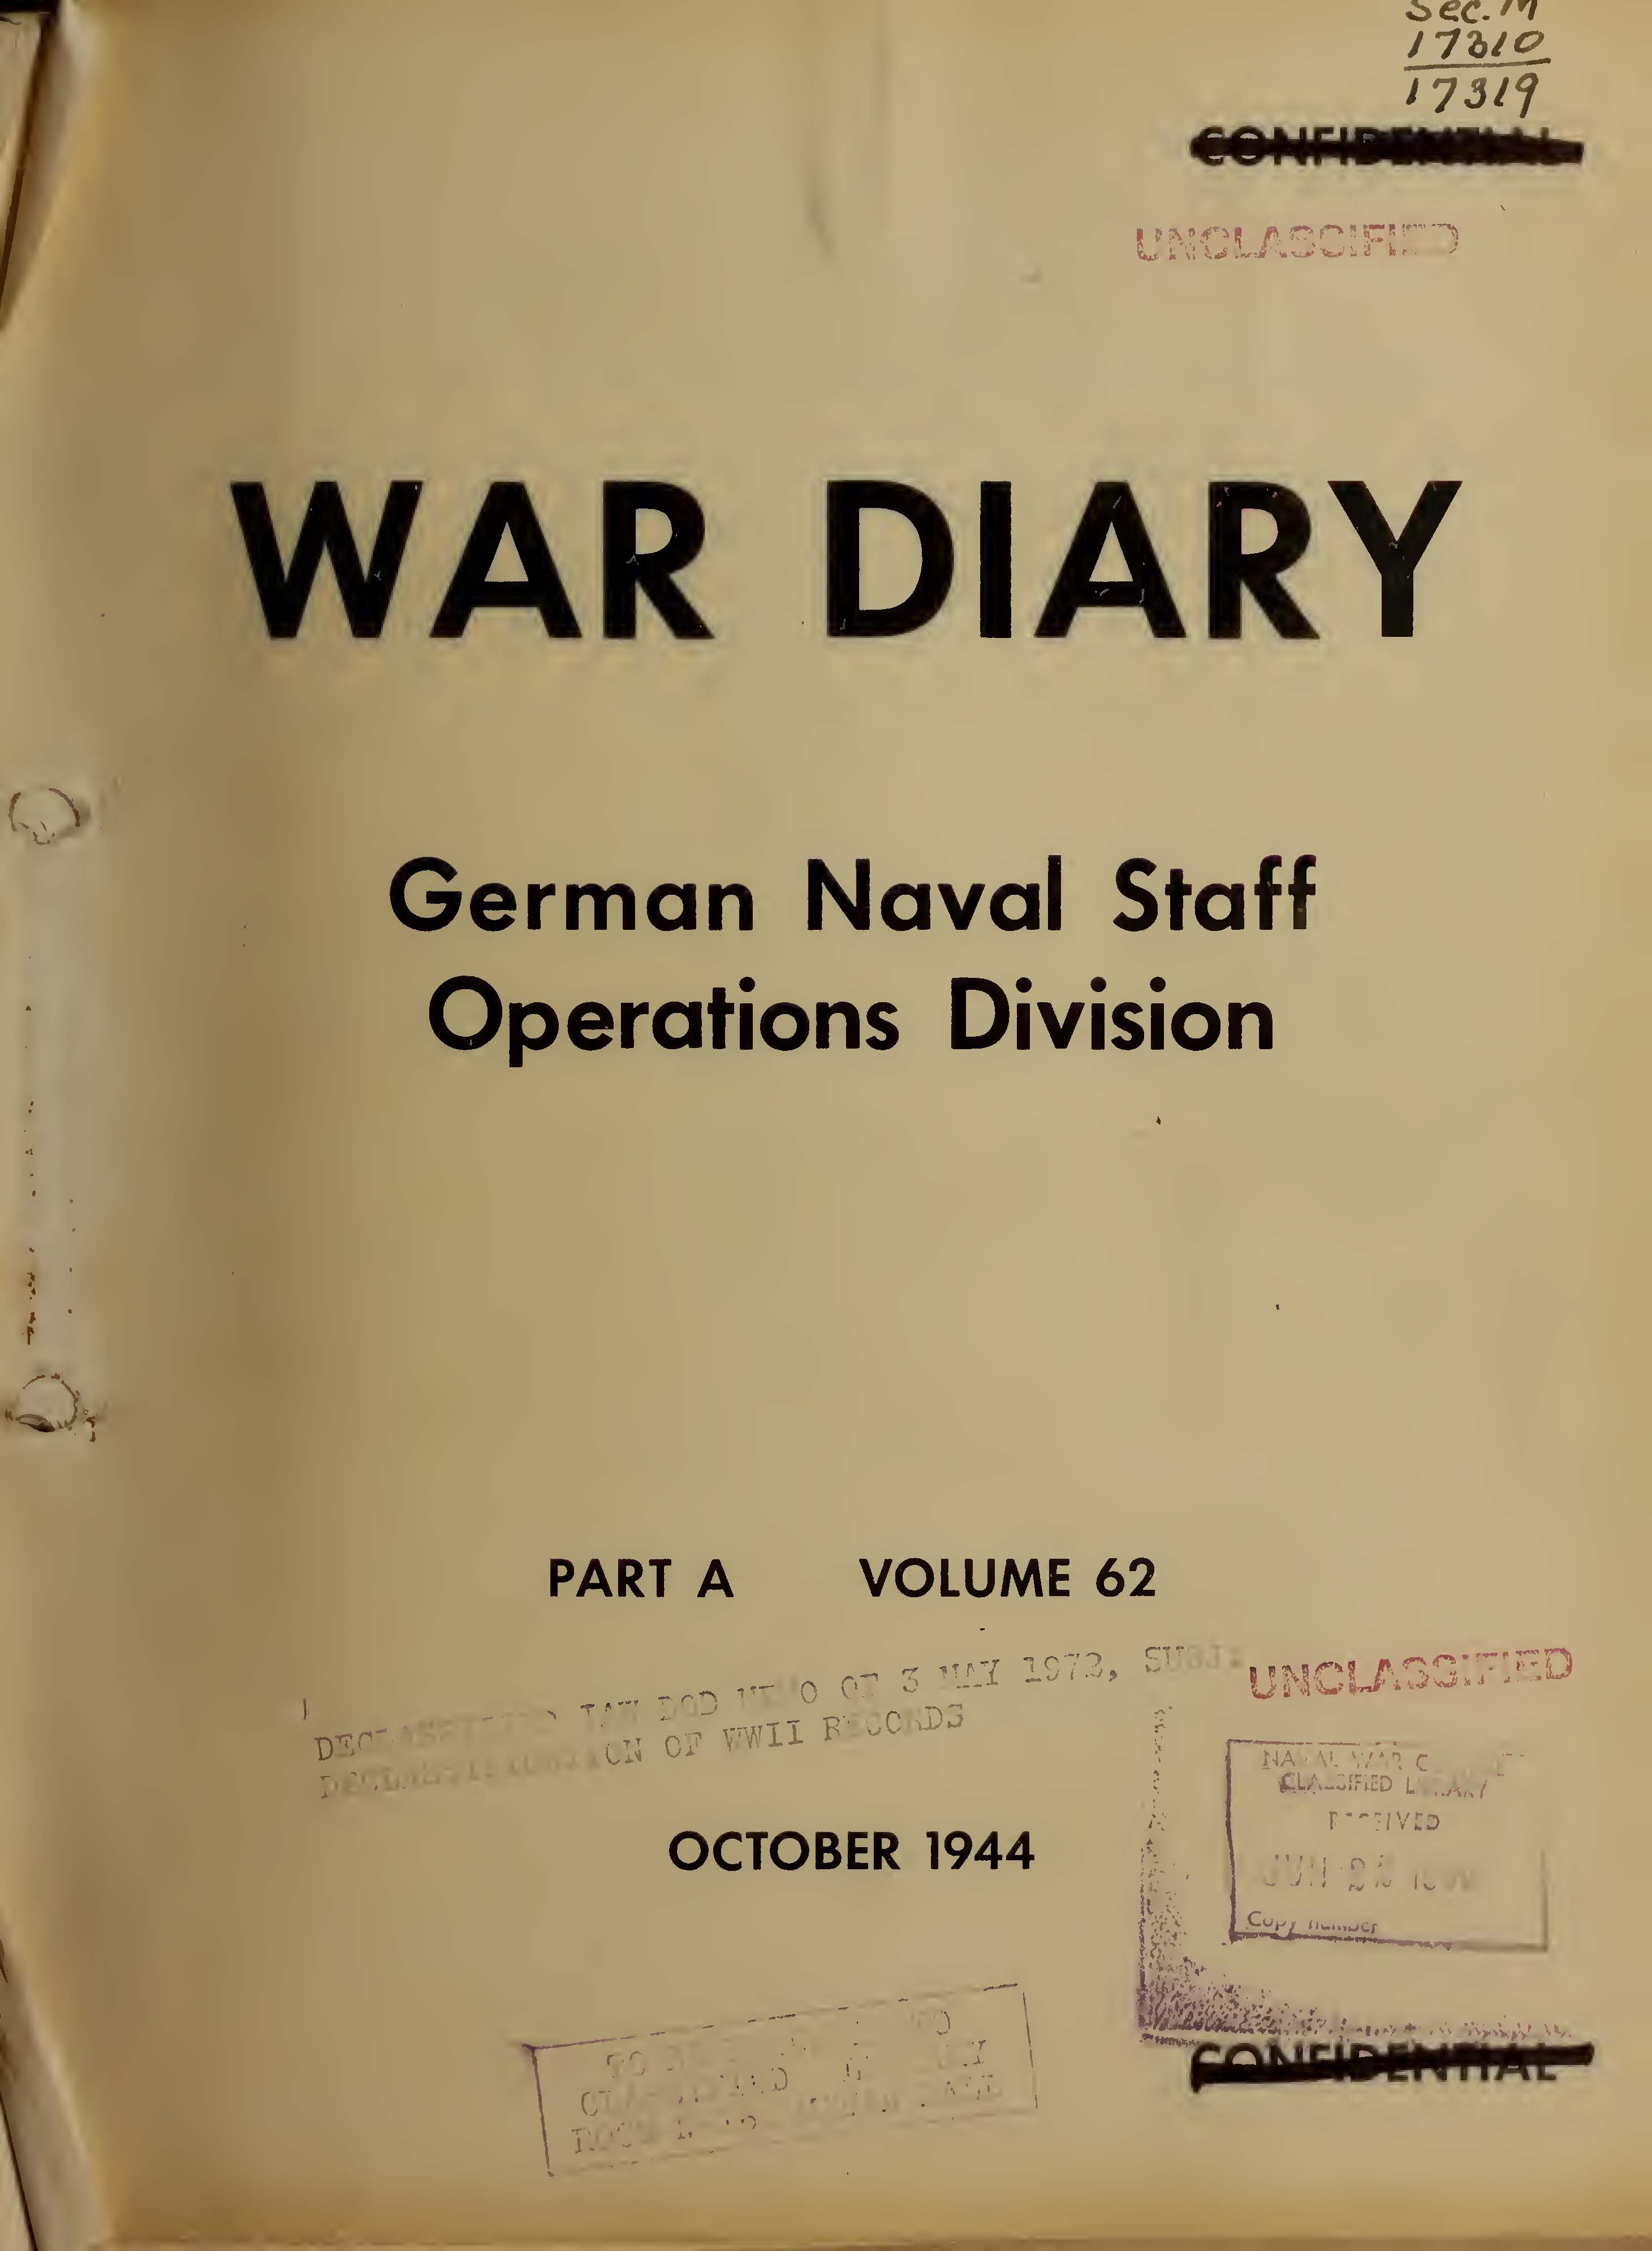 War Diary of German Naval Staff (Operations Division) Part A, Volume 62, October 1944